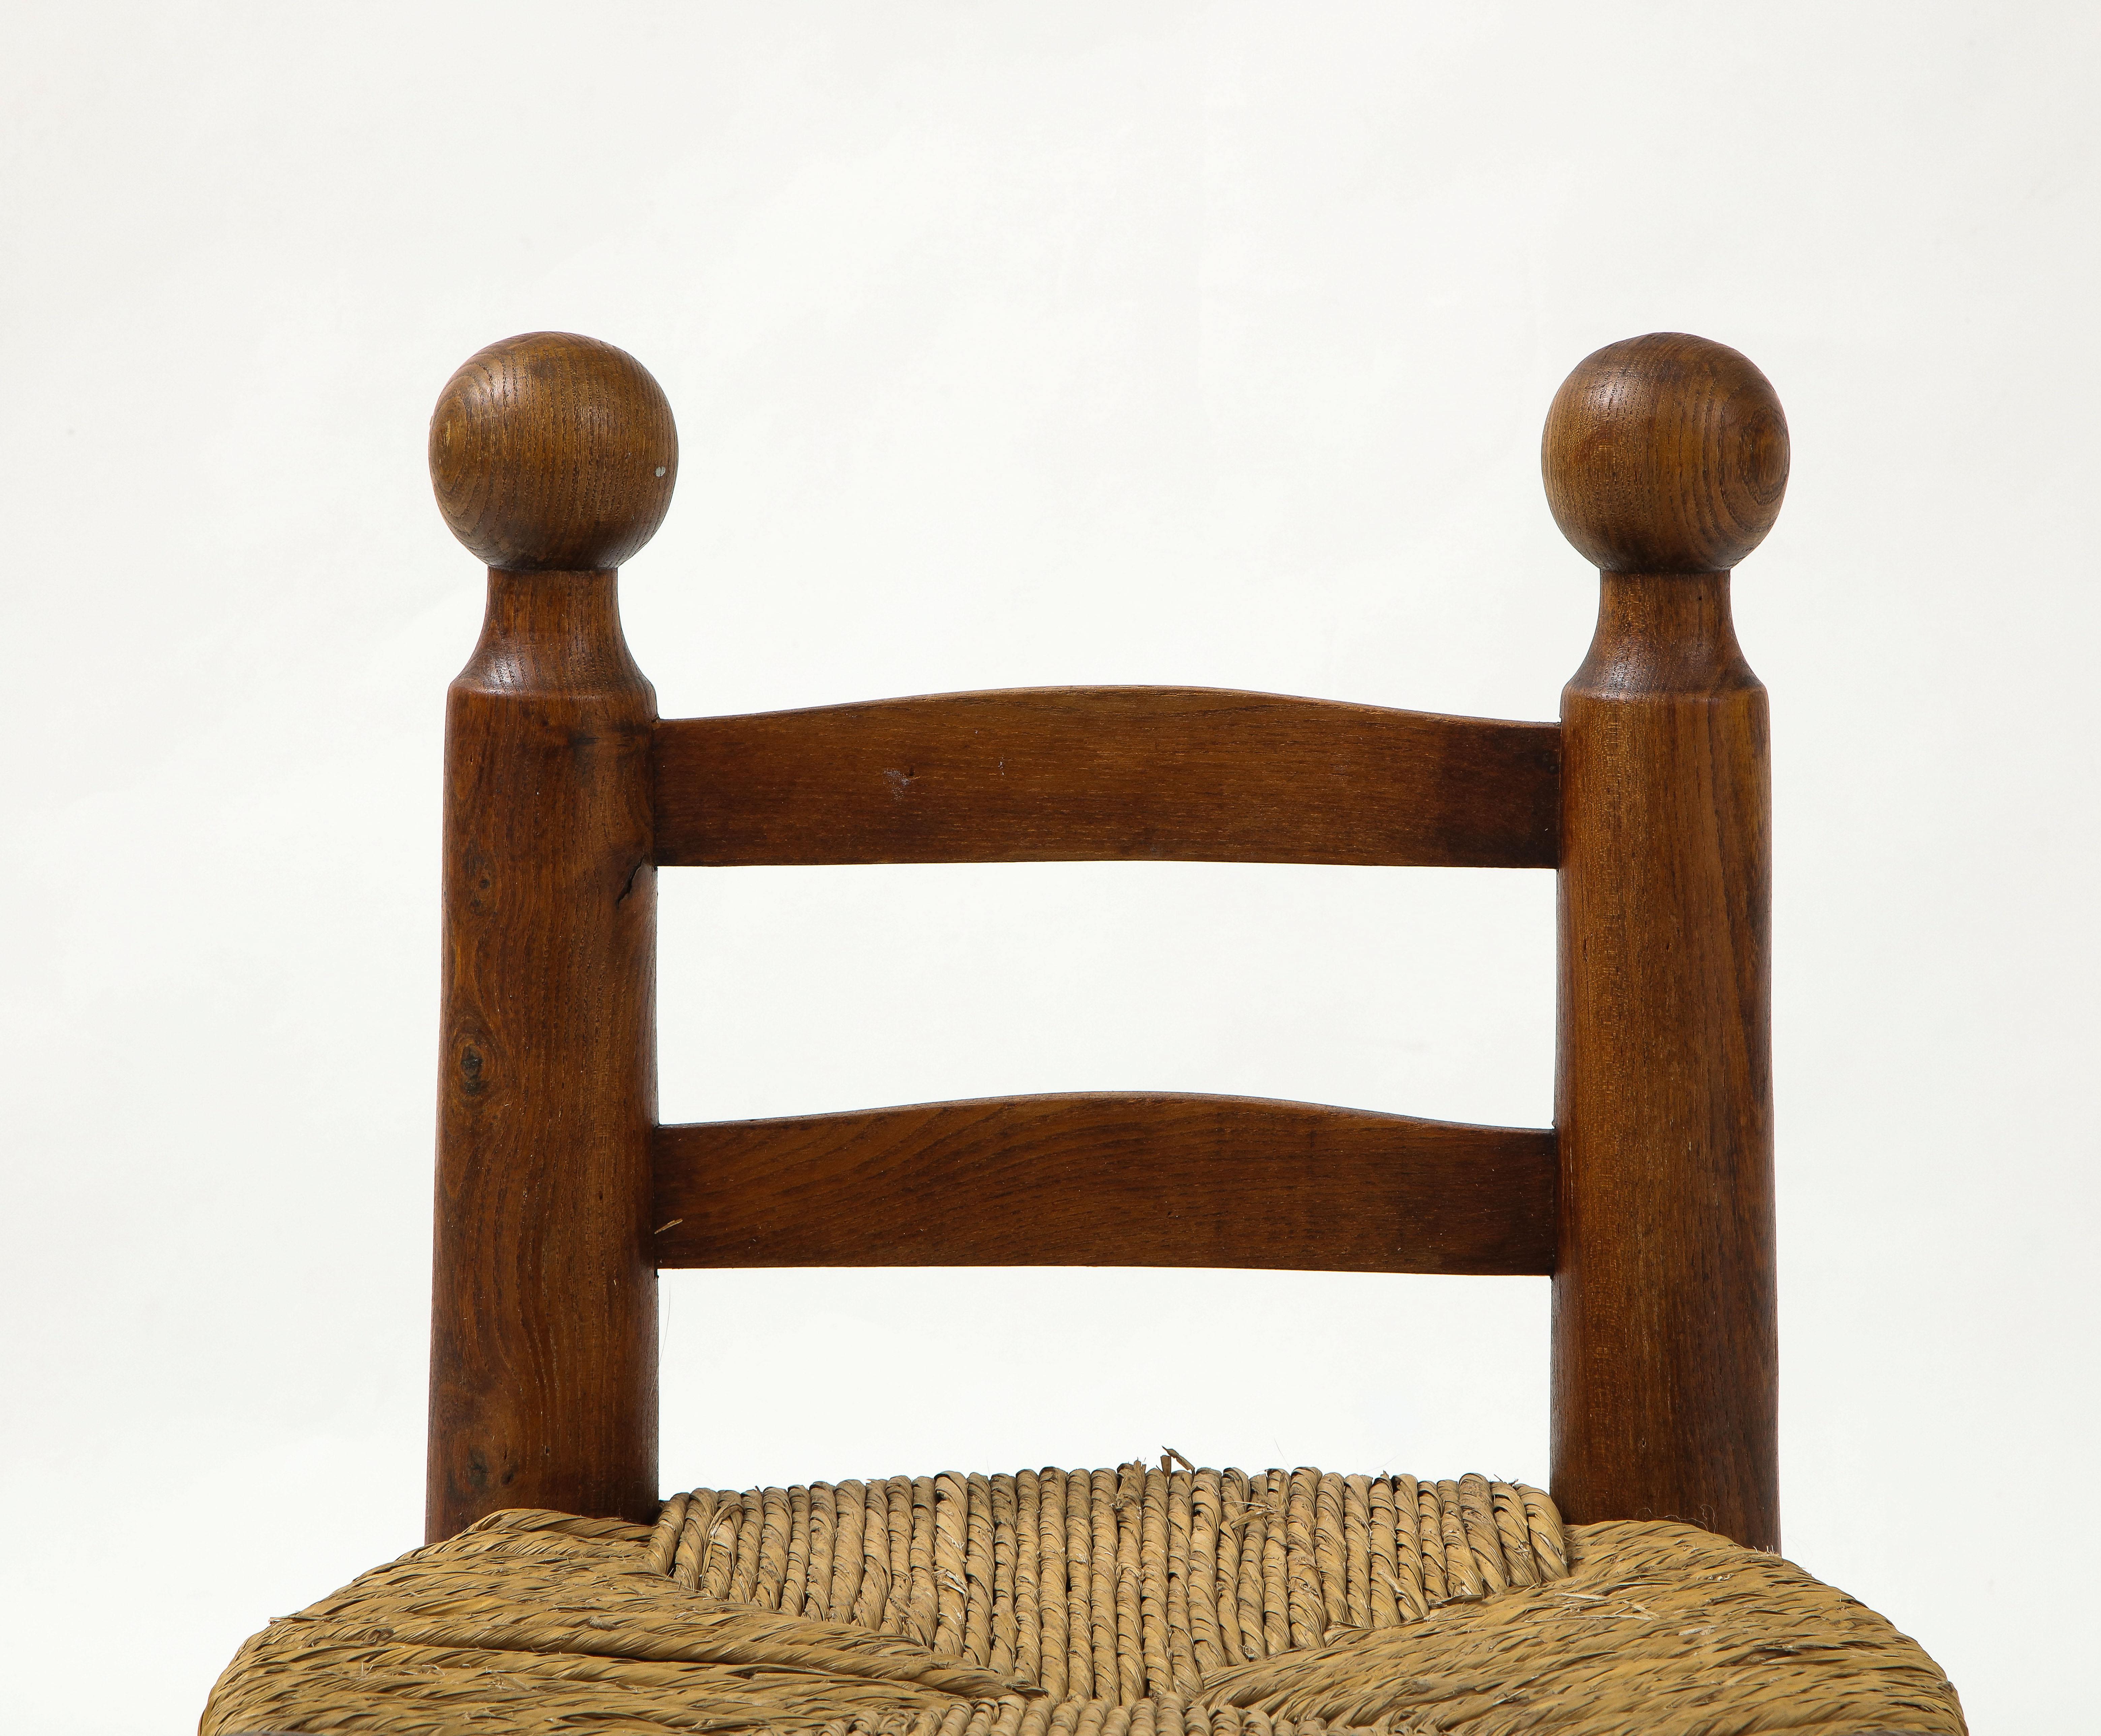 Small chair with rush seat and large ball finials, probably Charles Dudouyt, France, circa 1940
Oak, rush
Measures: Height back 23.75, seat H 11.25, W 17.5 D 15 in.